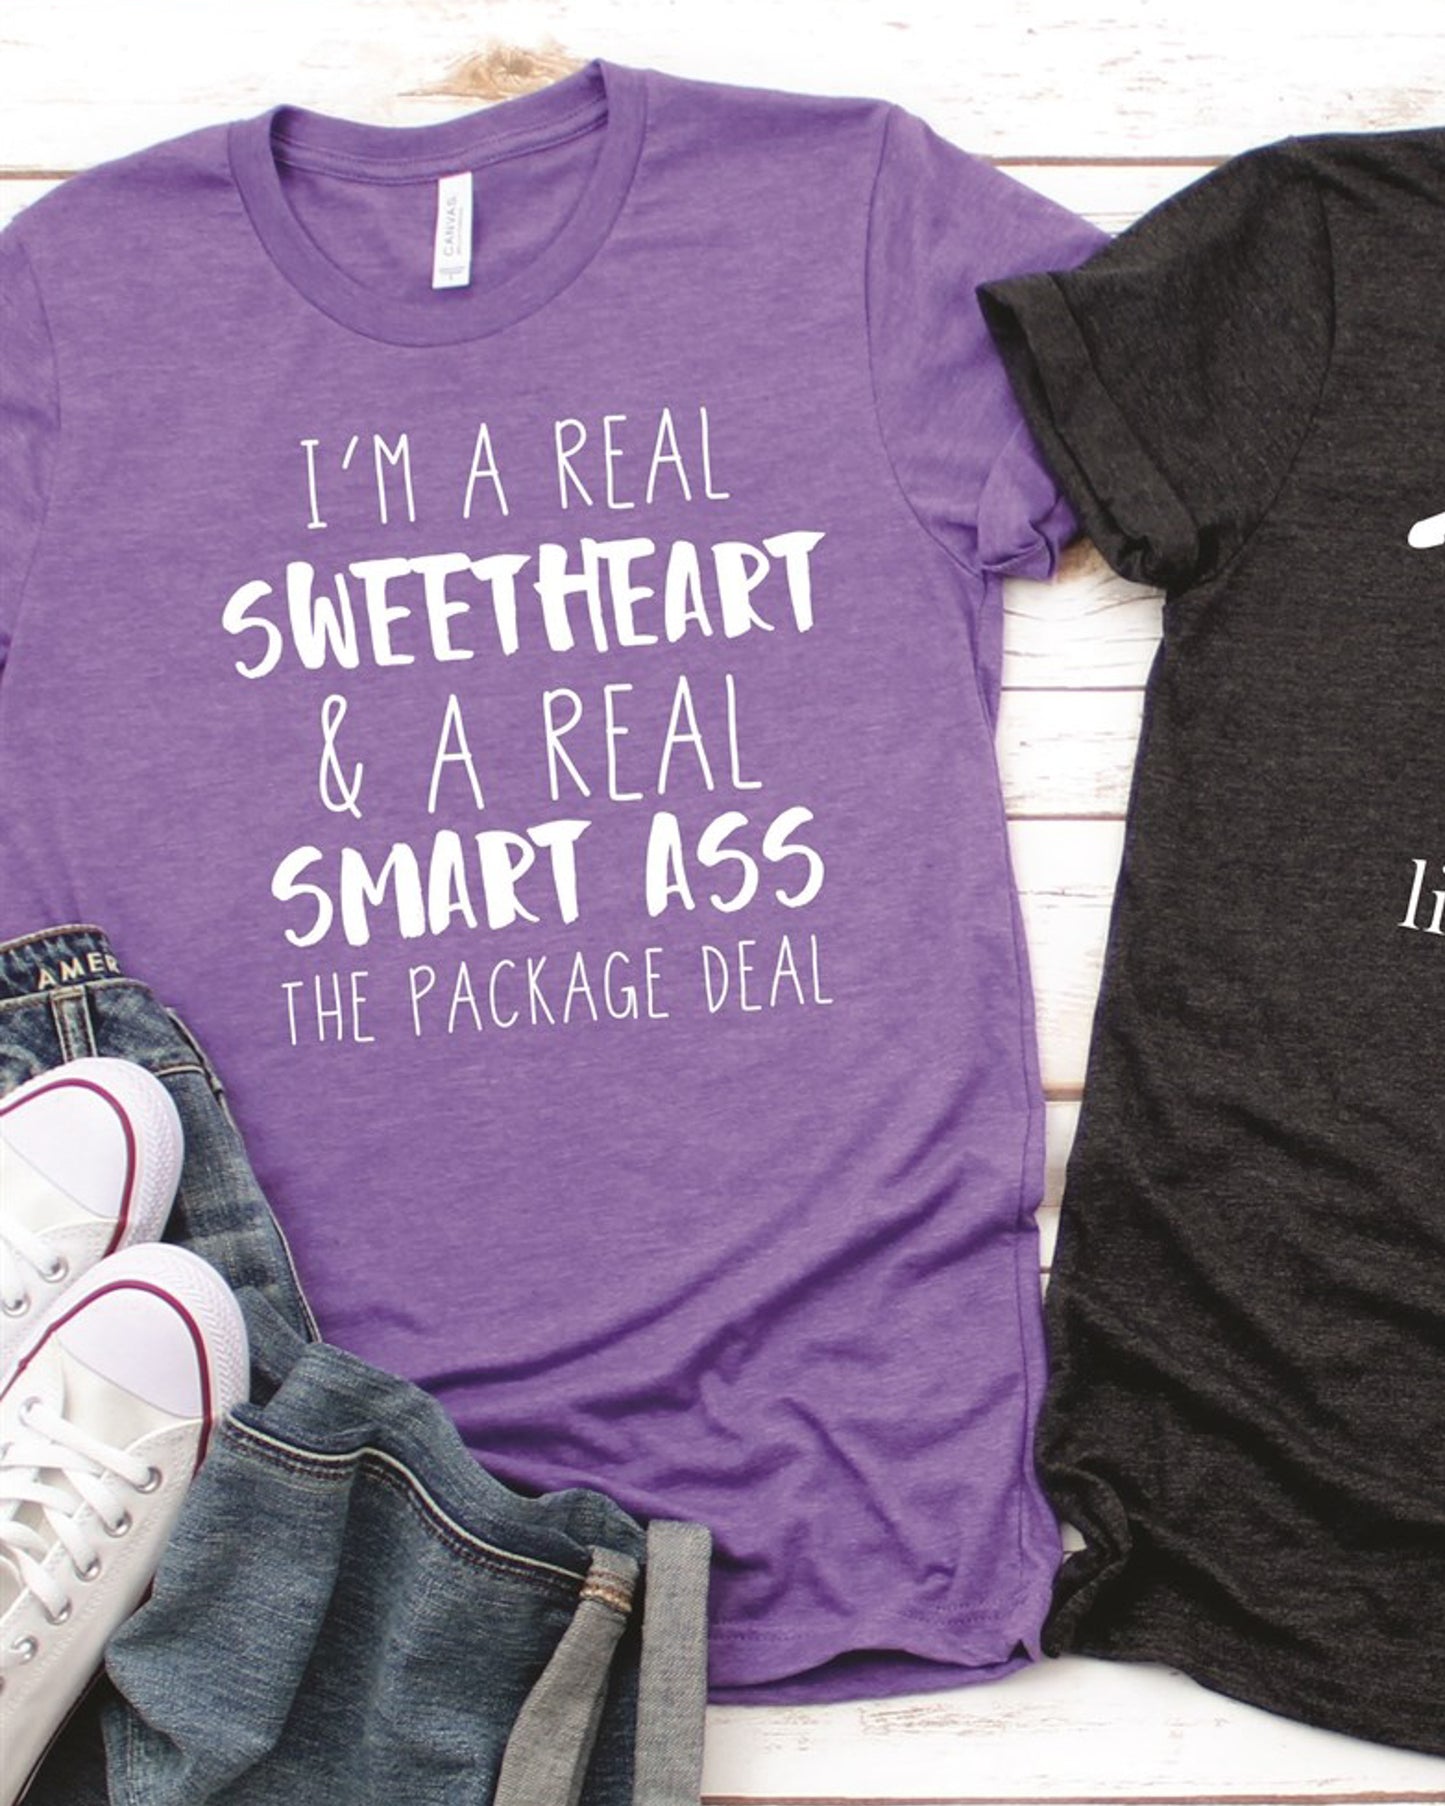 I'm A Real Sweetheart & A Real Smart Ass The Package Deal Tee